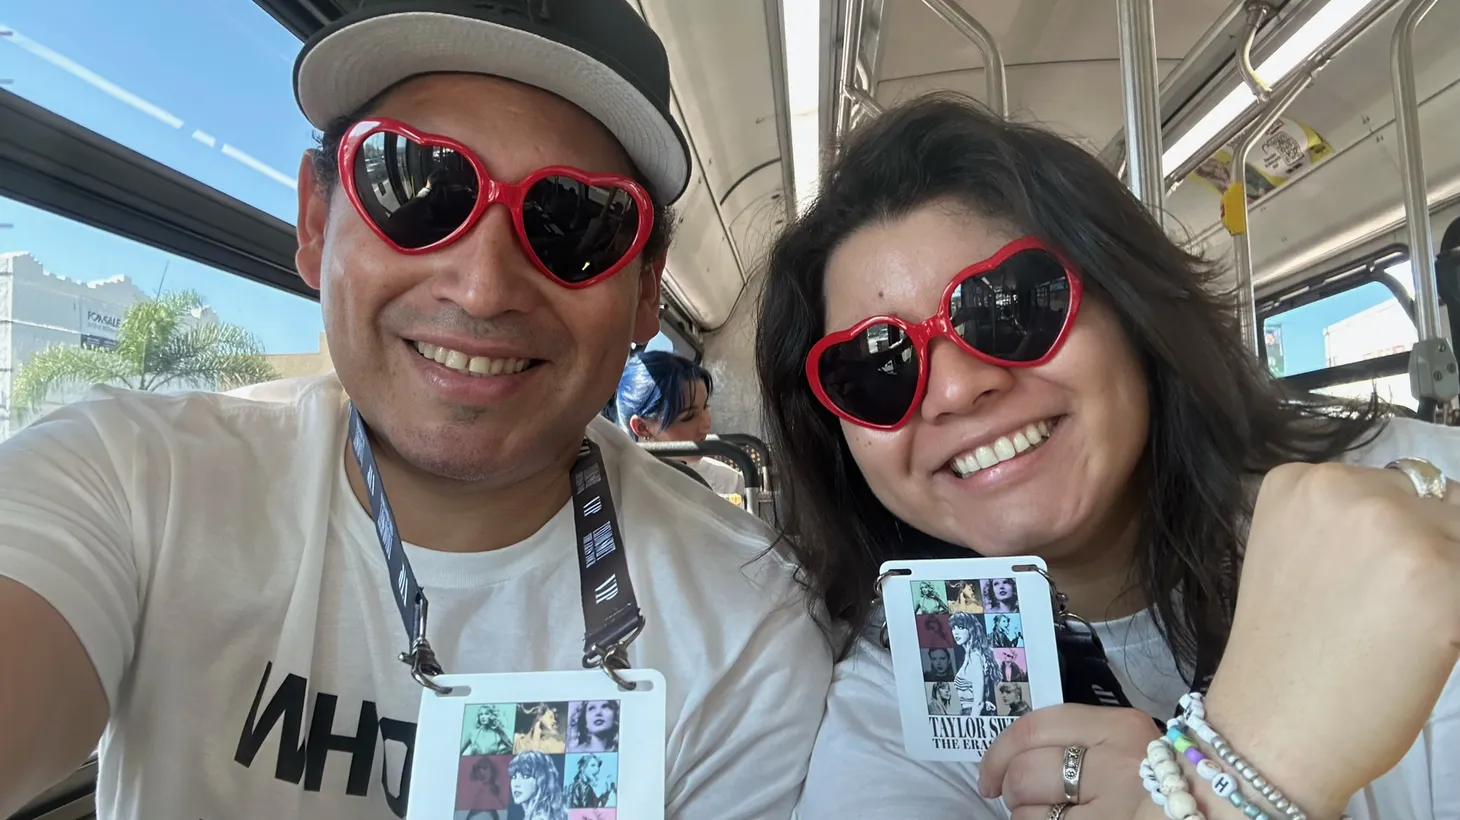 Danielle and Marco Chiriguayo en route to the Eras Tour at So-Fi stadium.